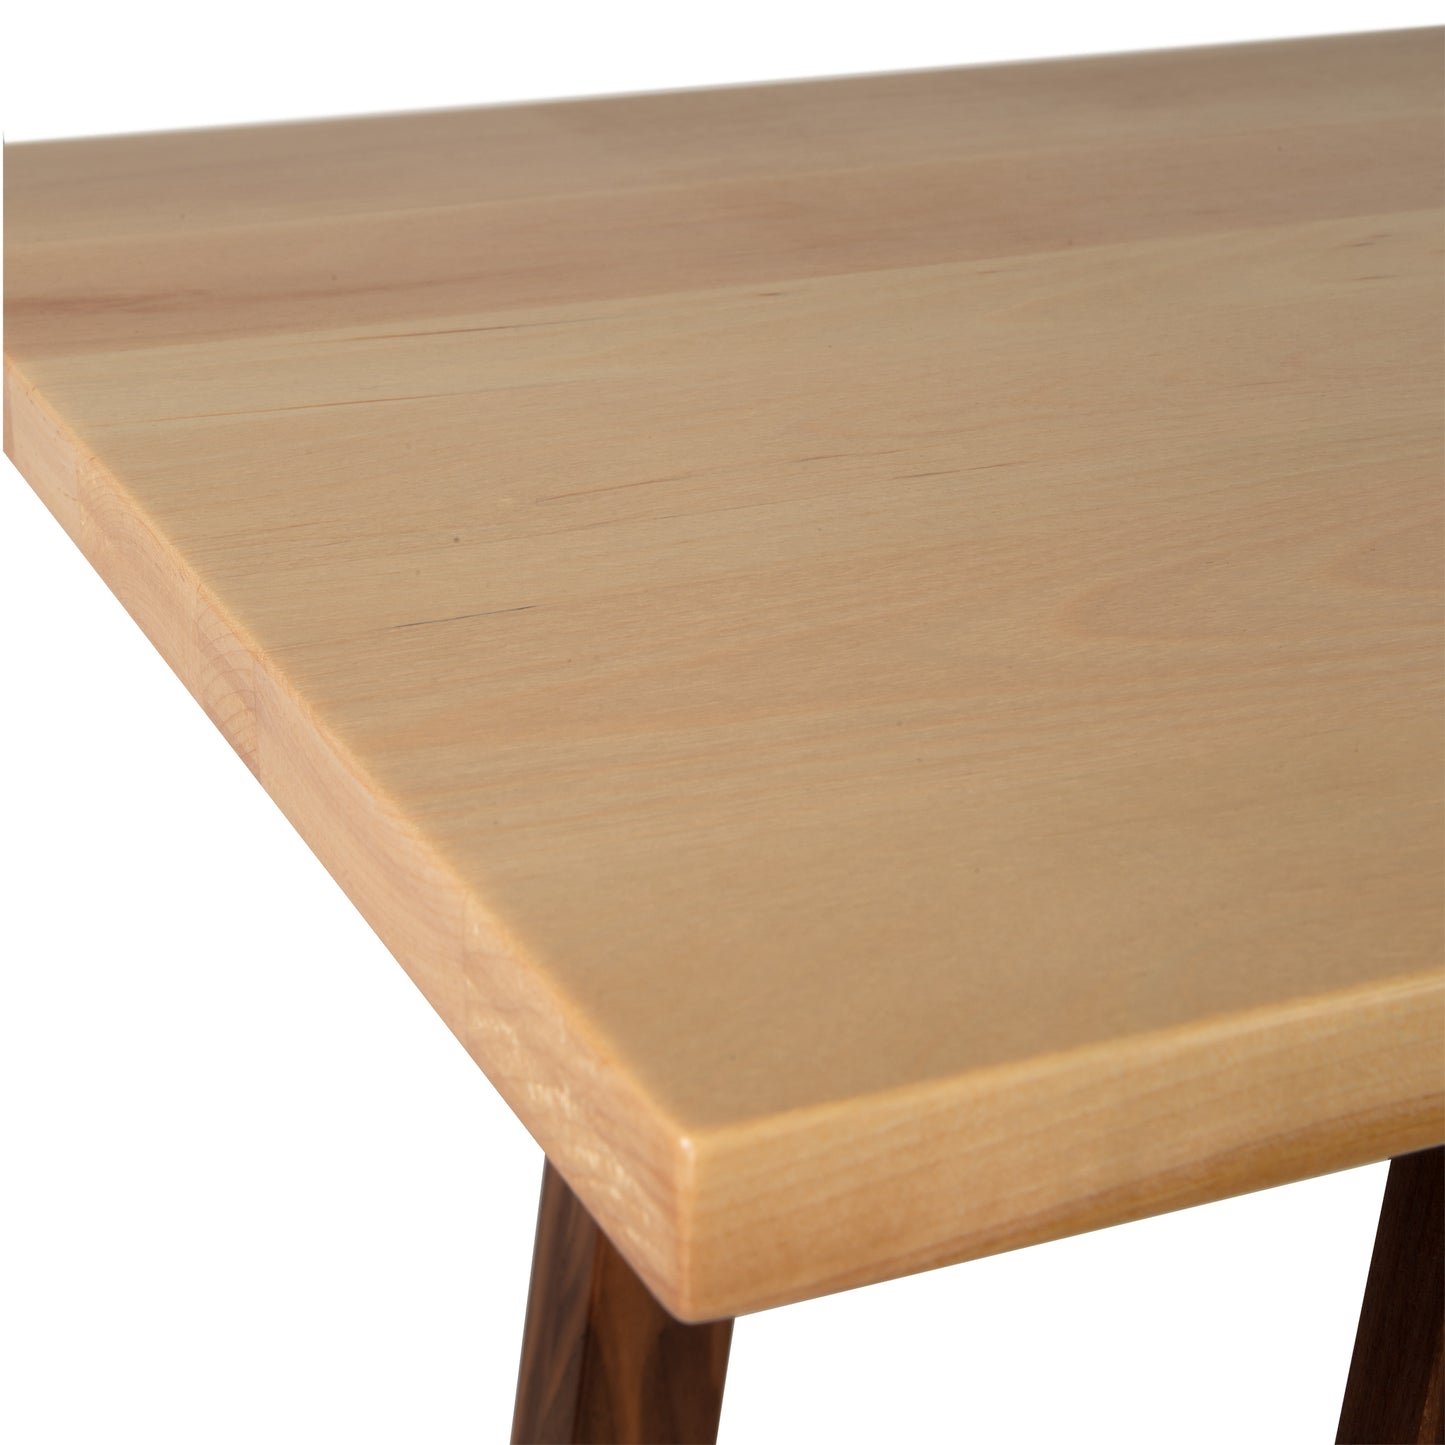 A close up of a wooden table with wooden legs.